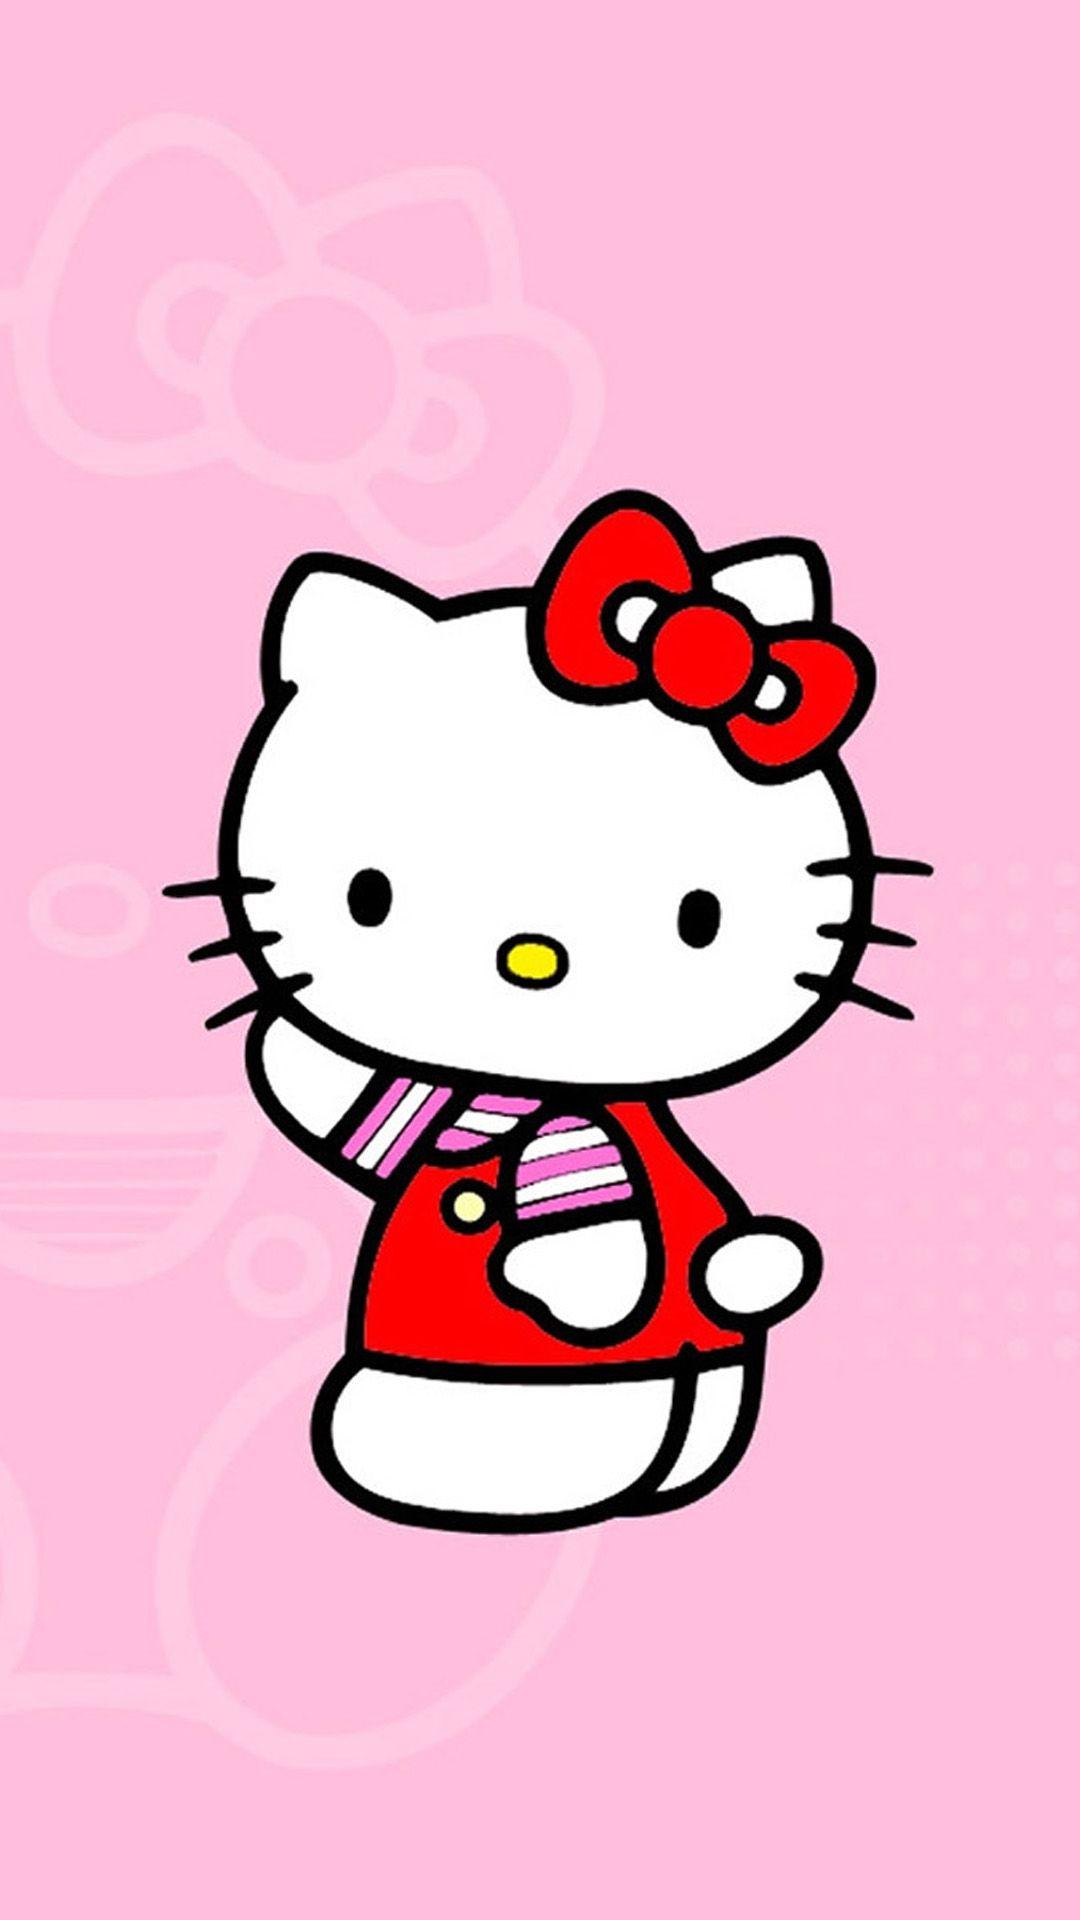 Cute Hello Kitty Wallpaper For Iphone